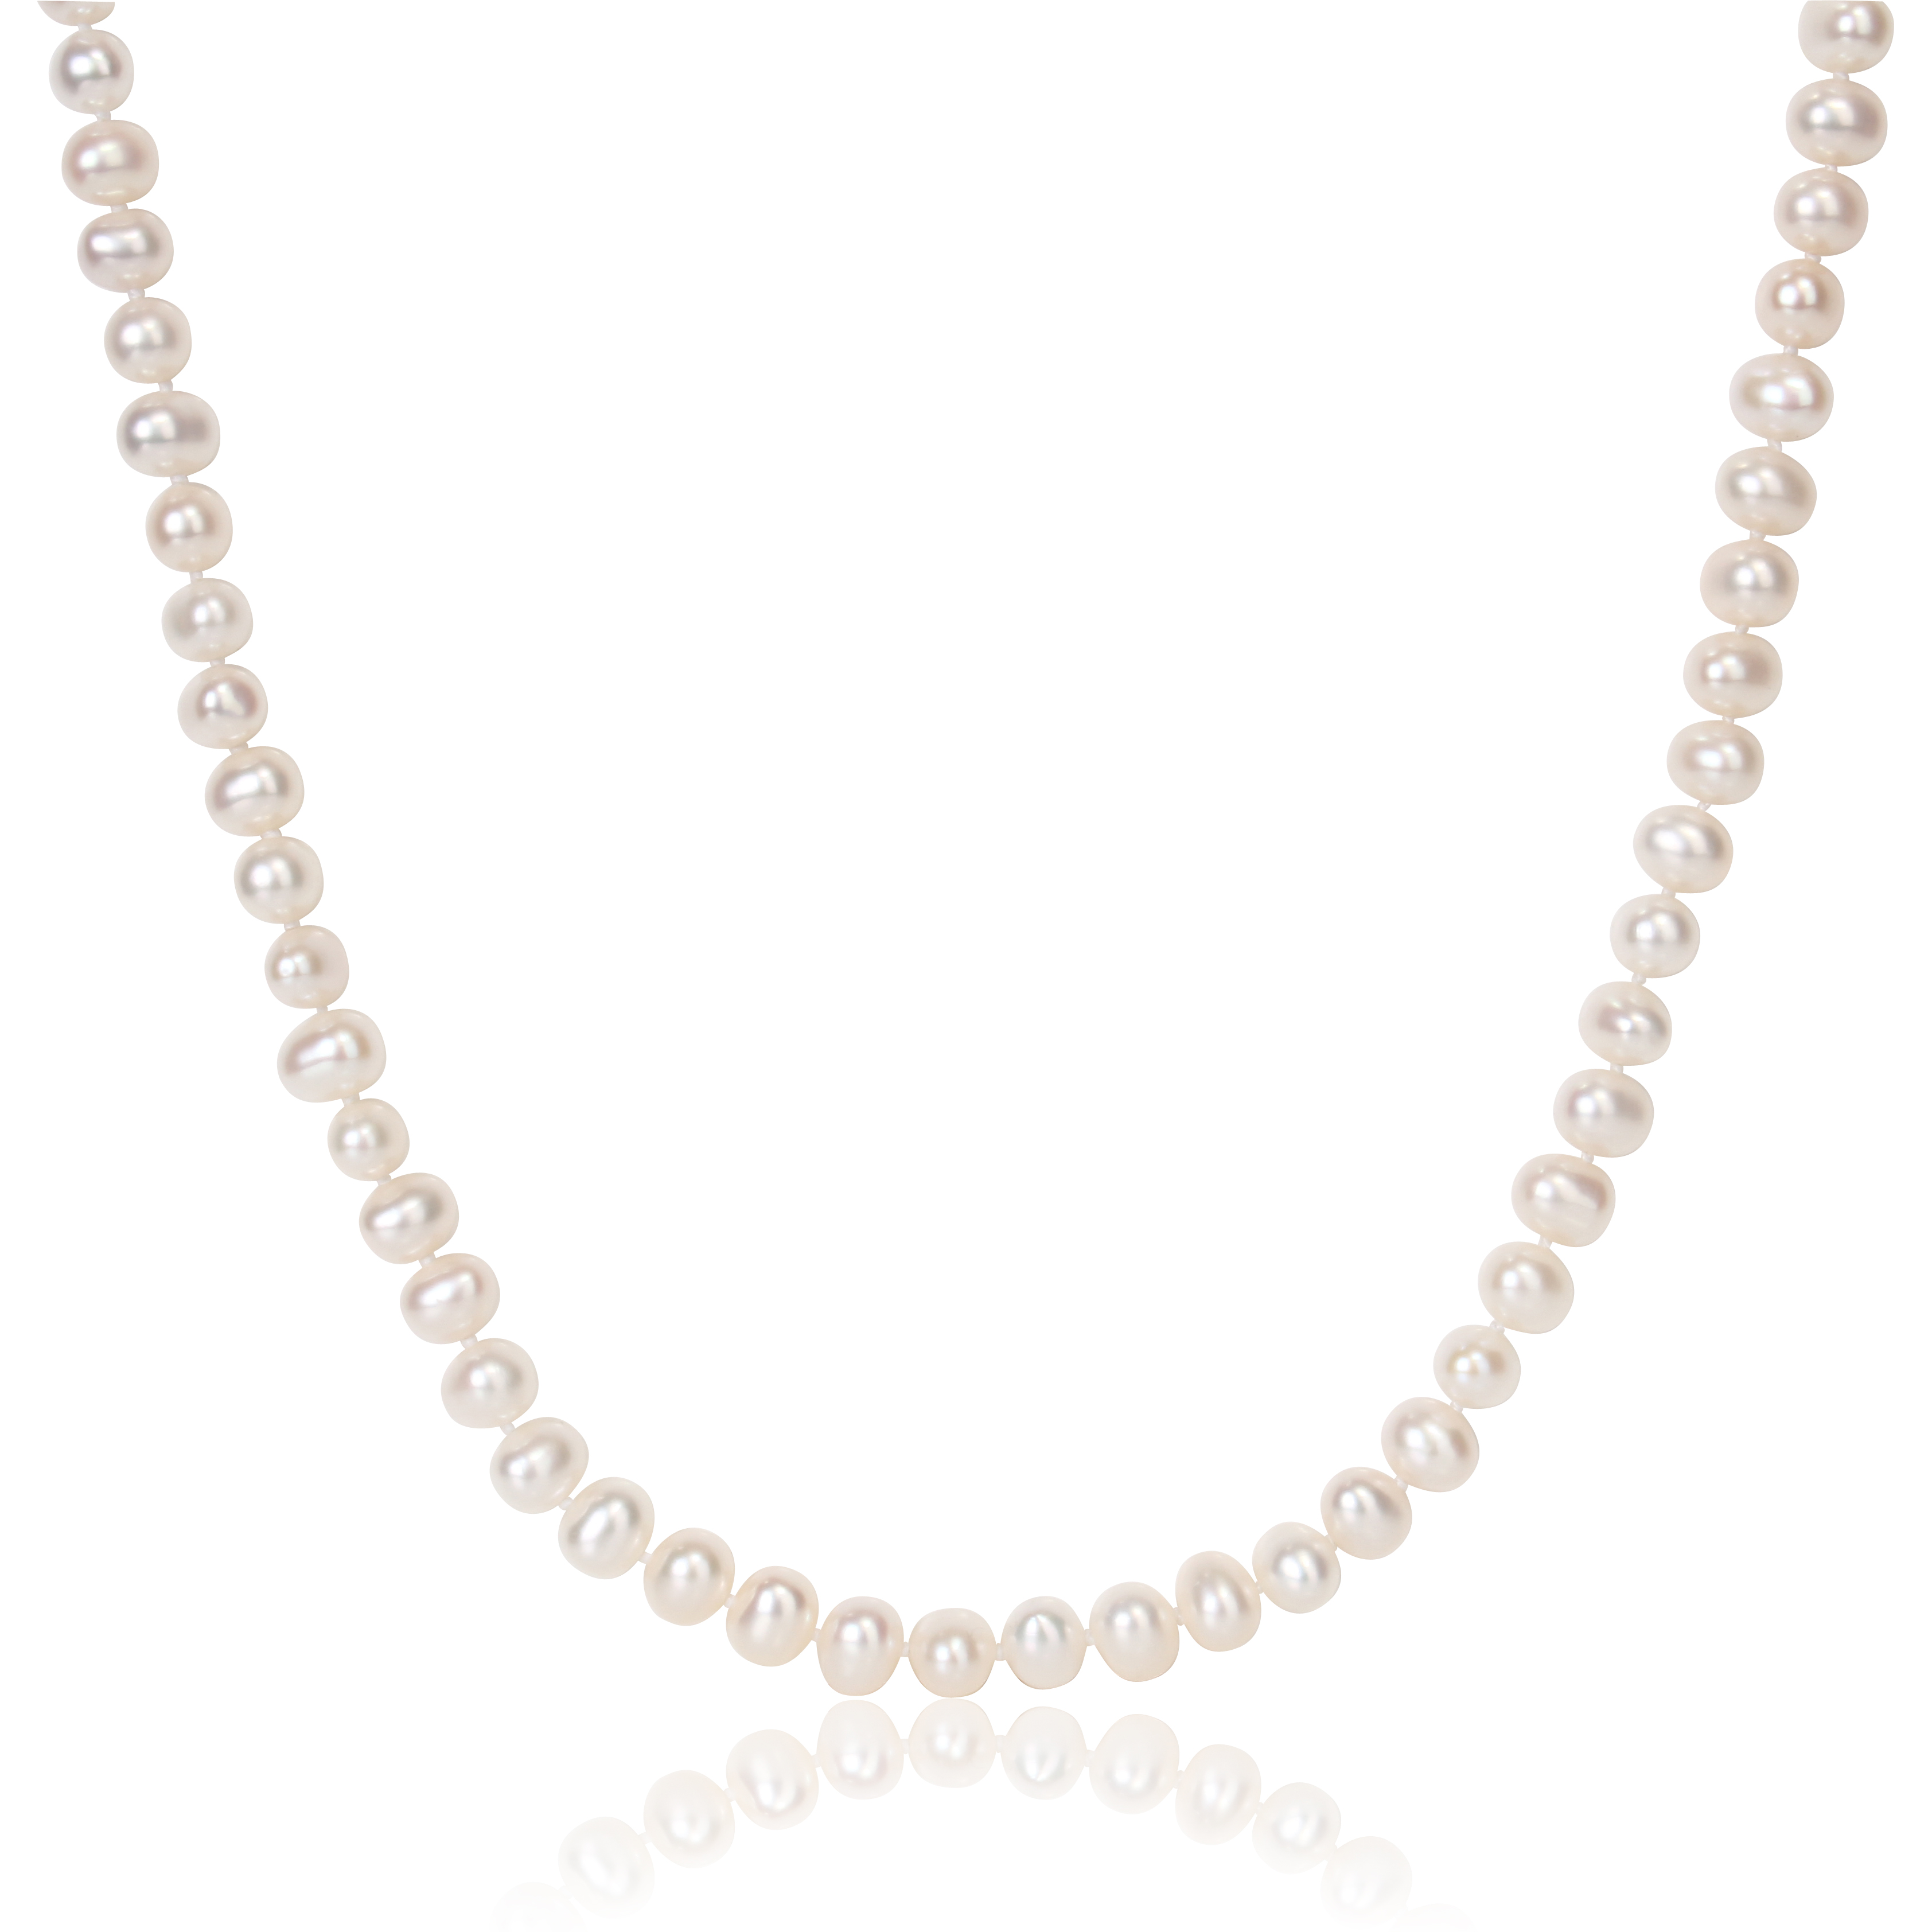 6 - 7 MM Cultured Freshwater Pearl Strand with Sterling Silver Ball Clasp - 20 in